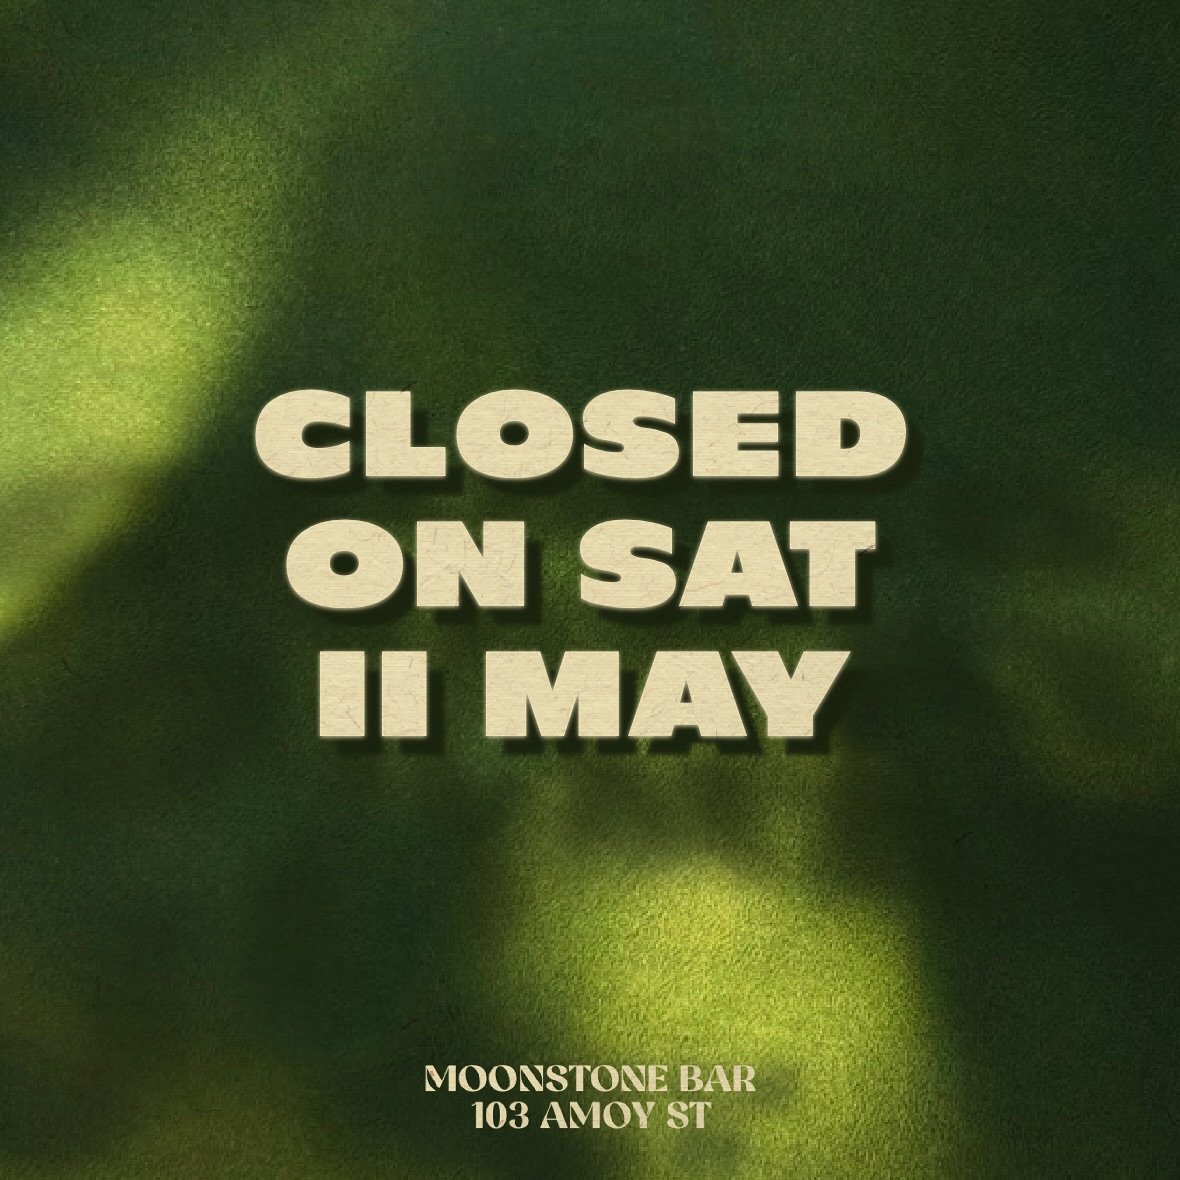 MOONSTONE will be closed on Sat 11 May for a private event 🌞